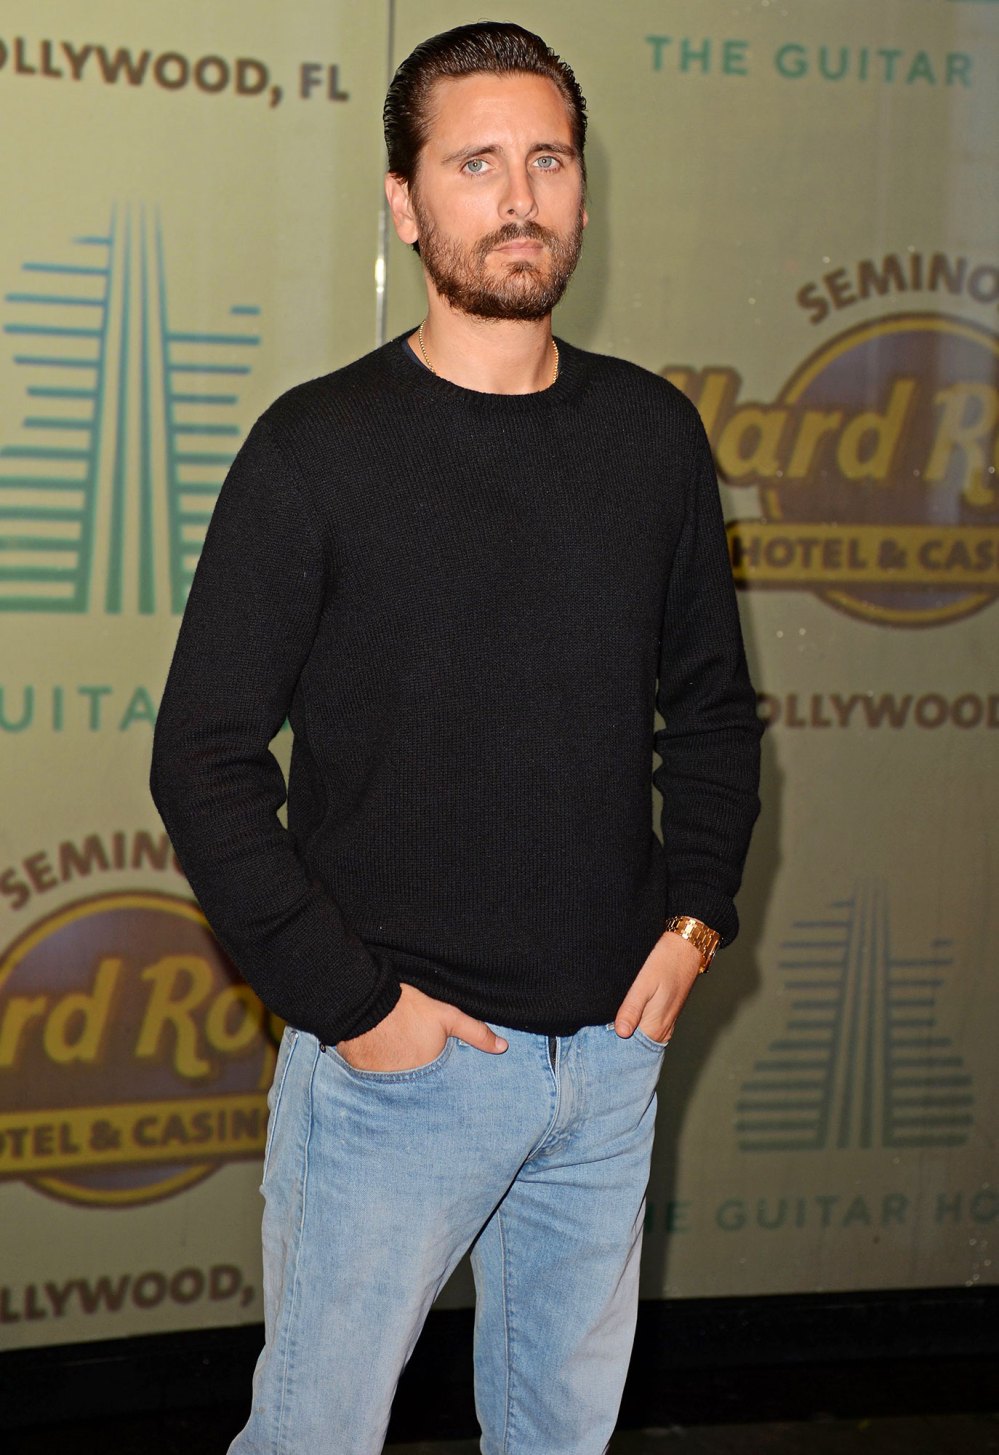 Scott Disick Shares Cryptic Message About Having No Tolerance for Drama